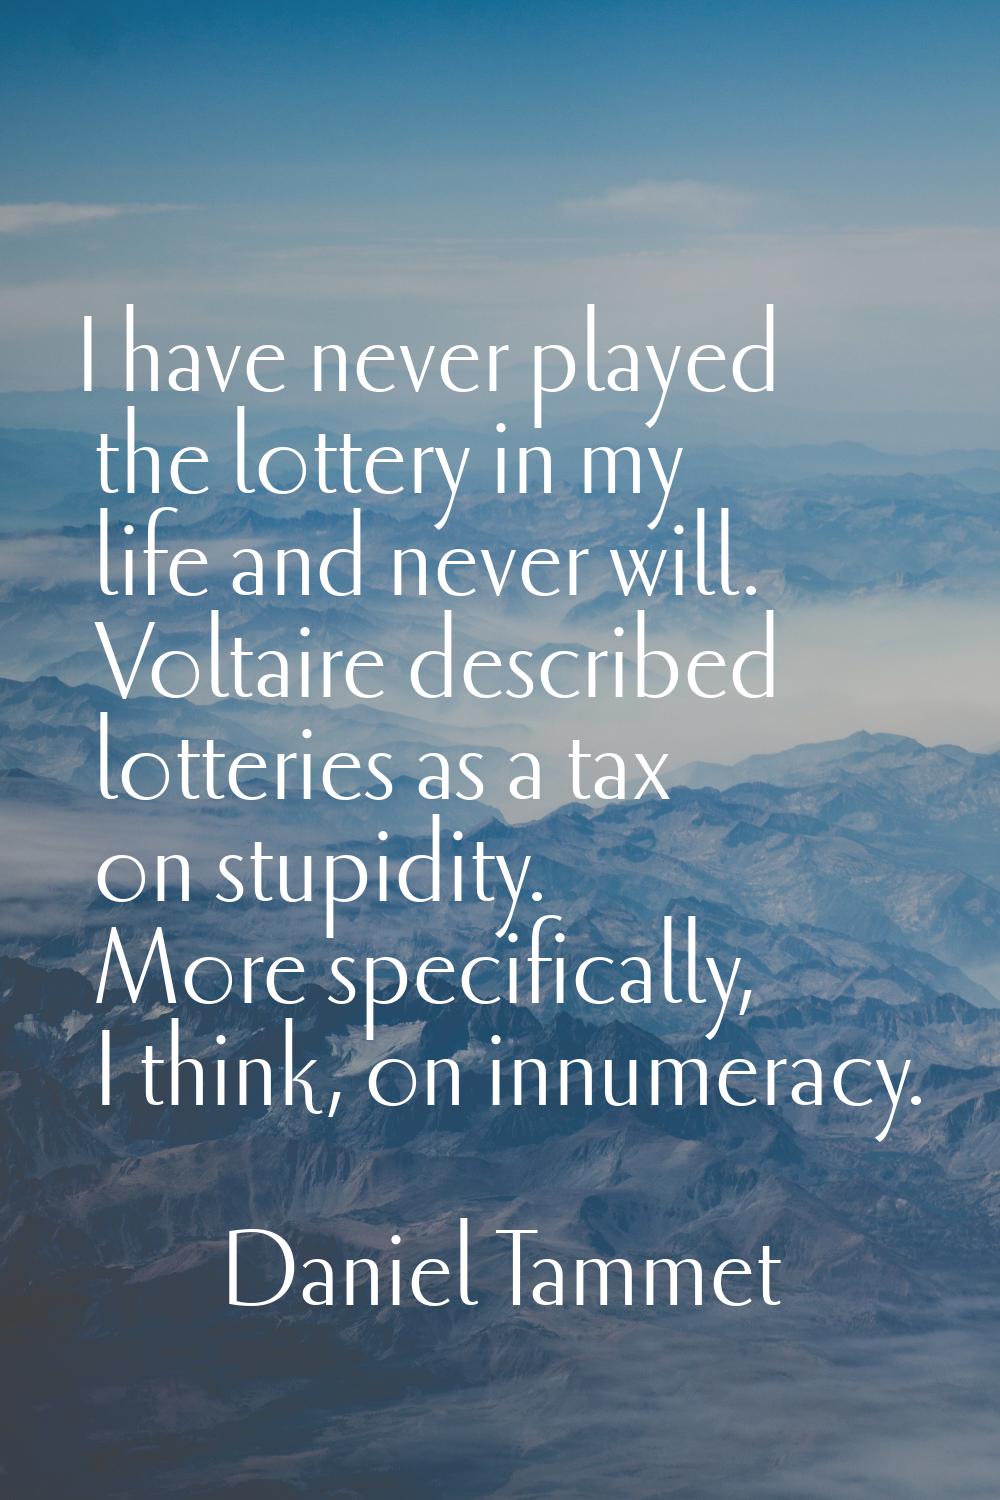 I have never played the lottery in my life and never will. Voltaire described lotteries as a tax on